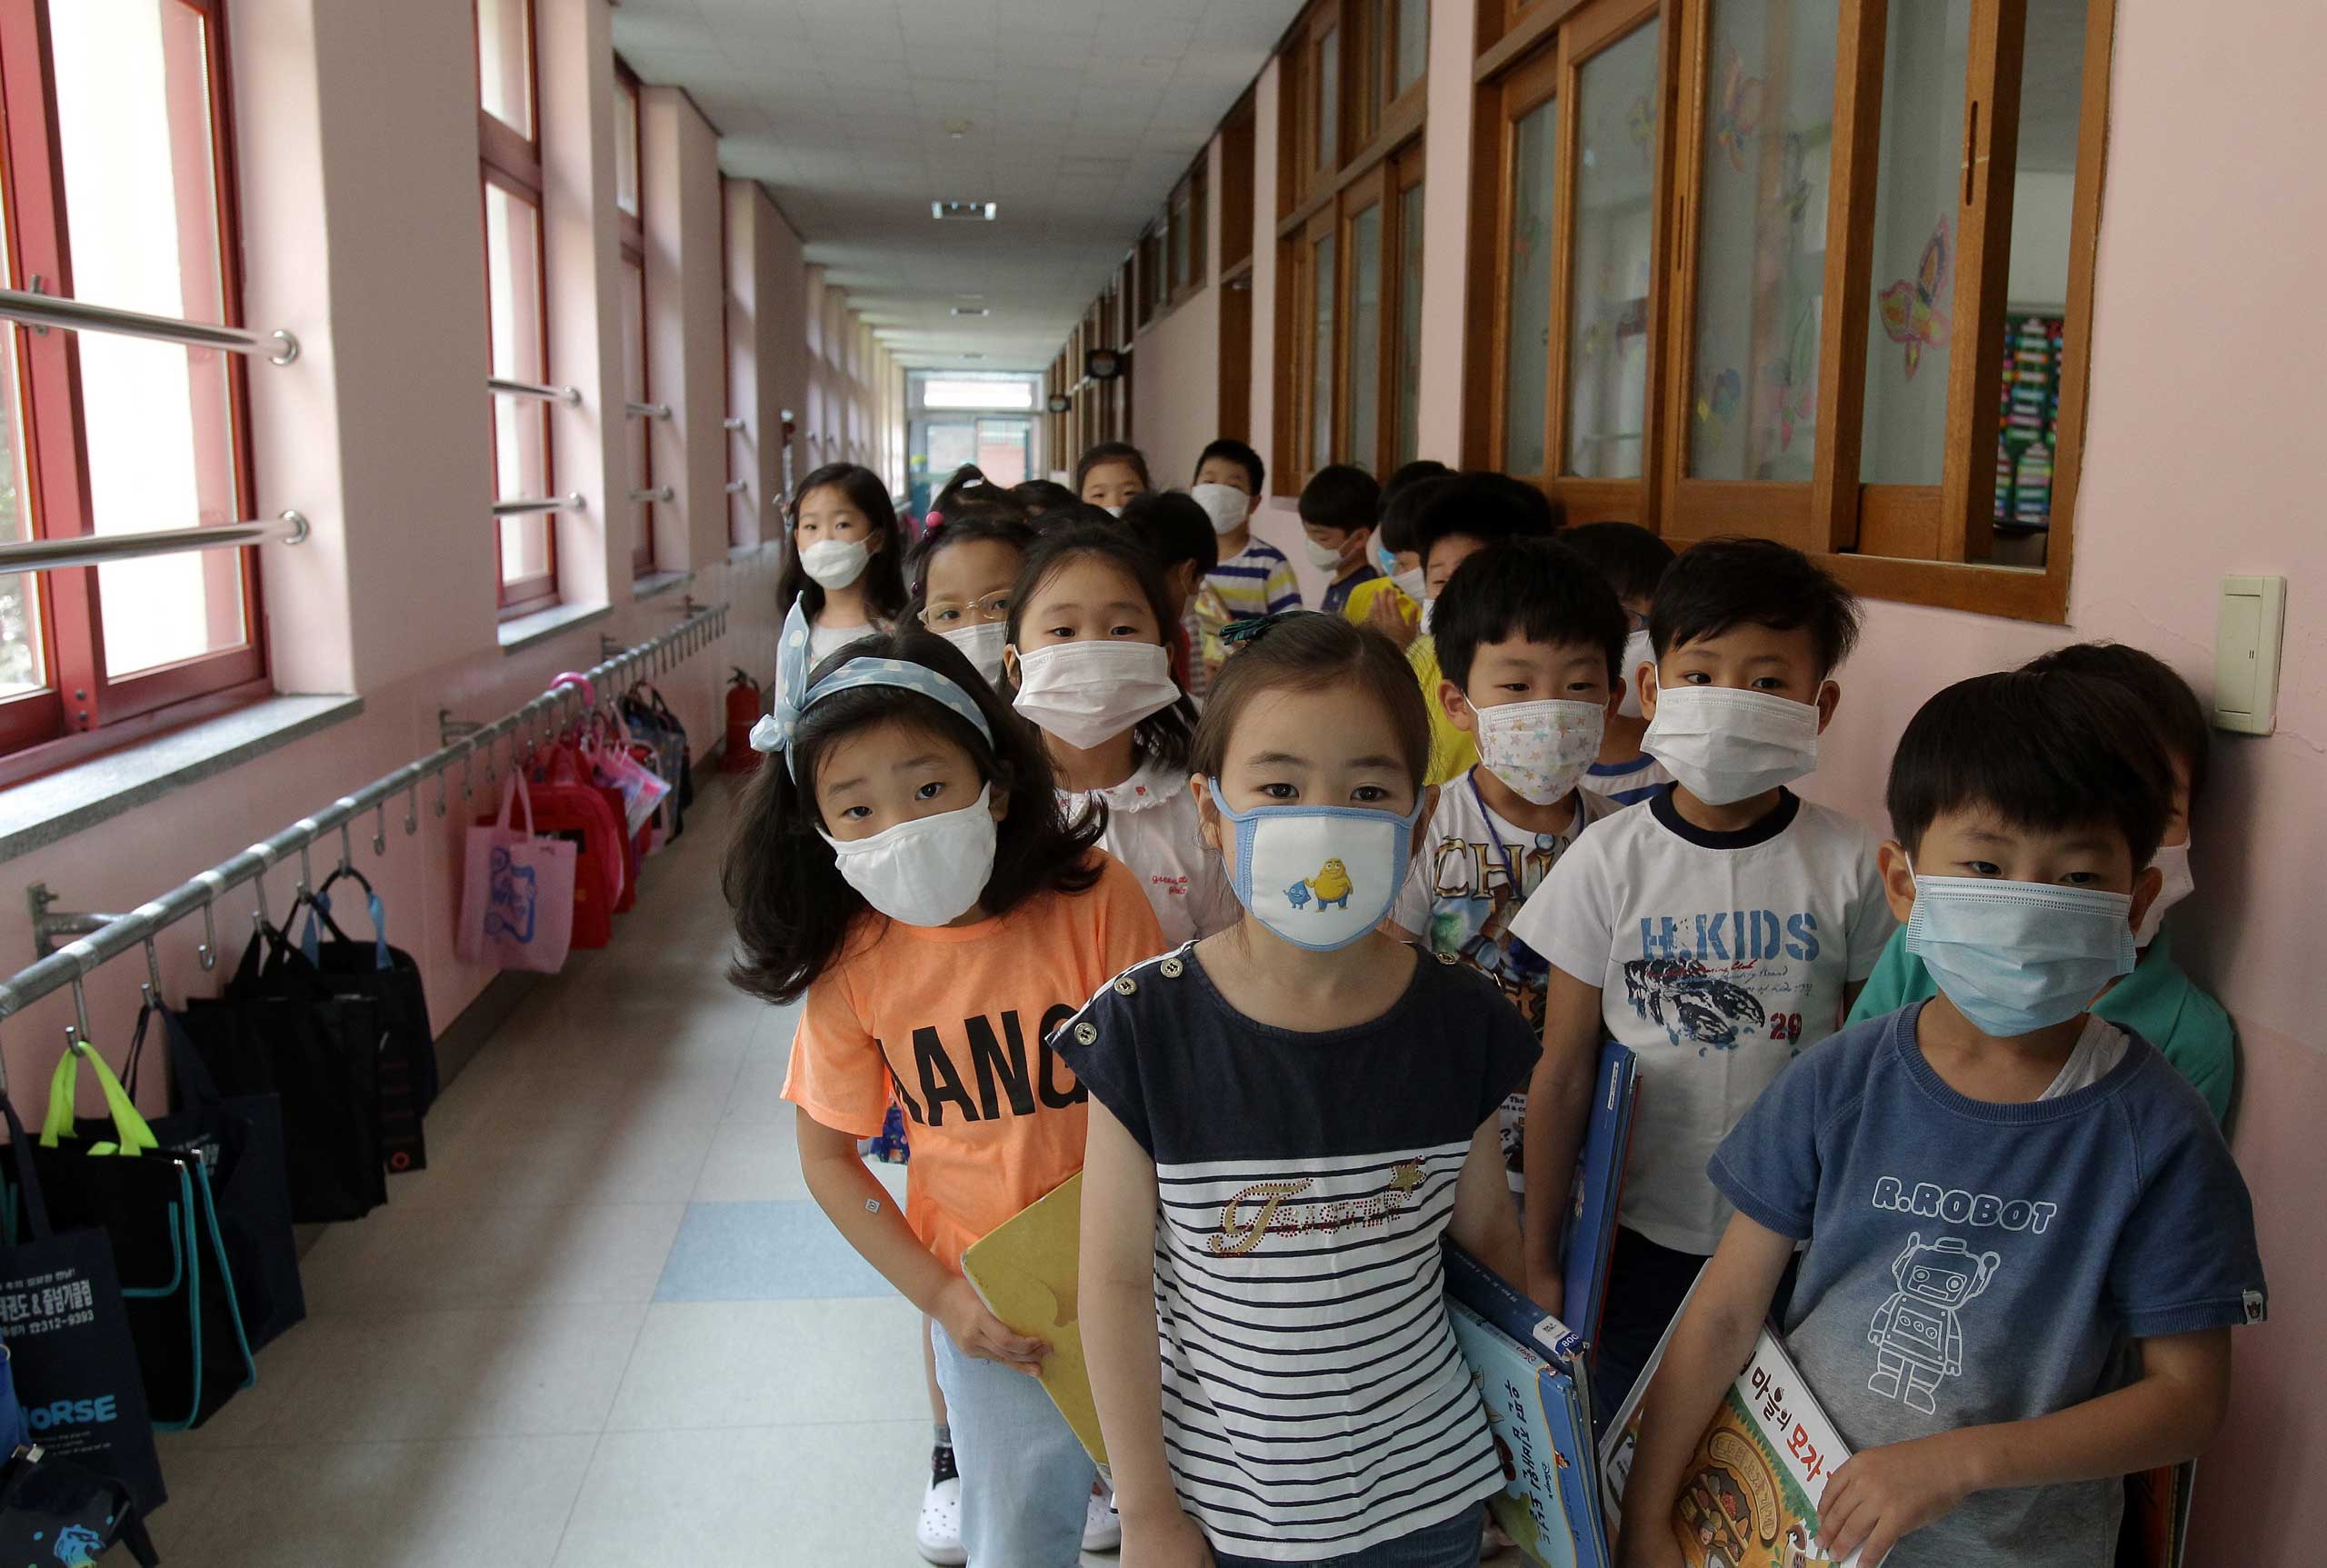 Elementary school students wear masks as a precaution against the MERS virus as they wait for a lesson to start at Midong Elementary School in Seoul on June 9, 2015.